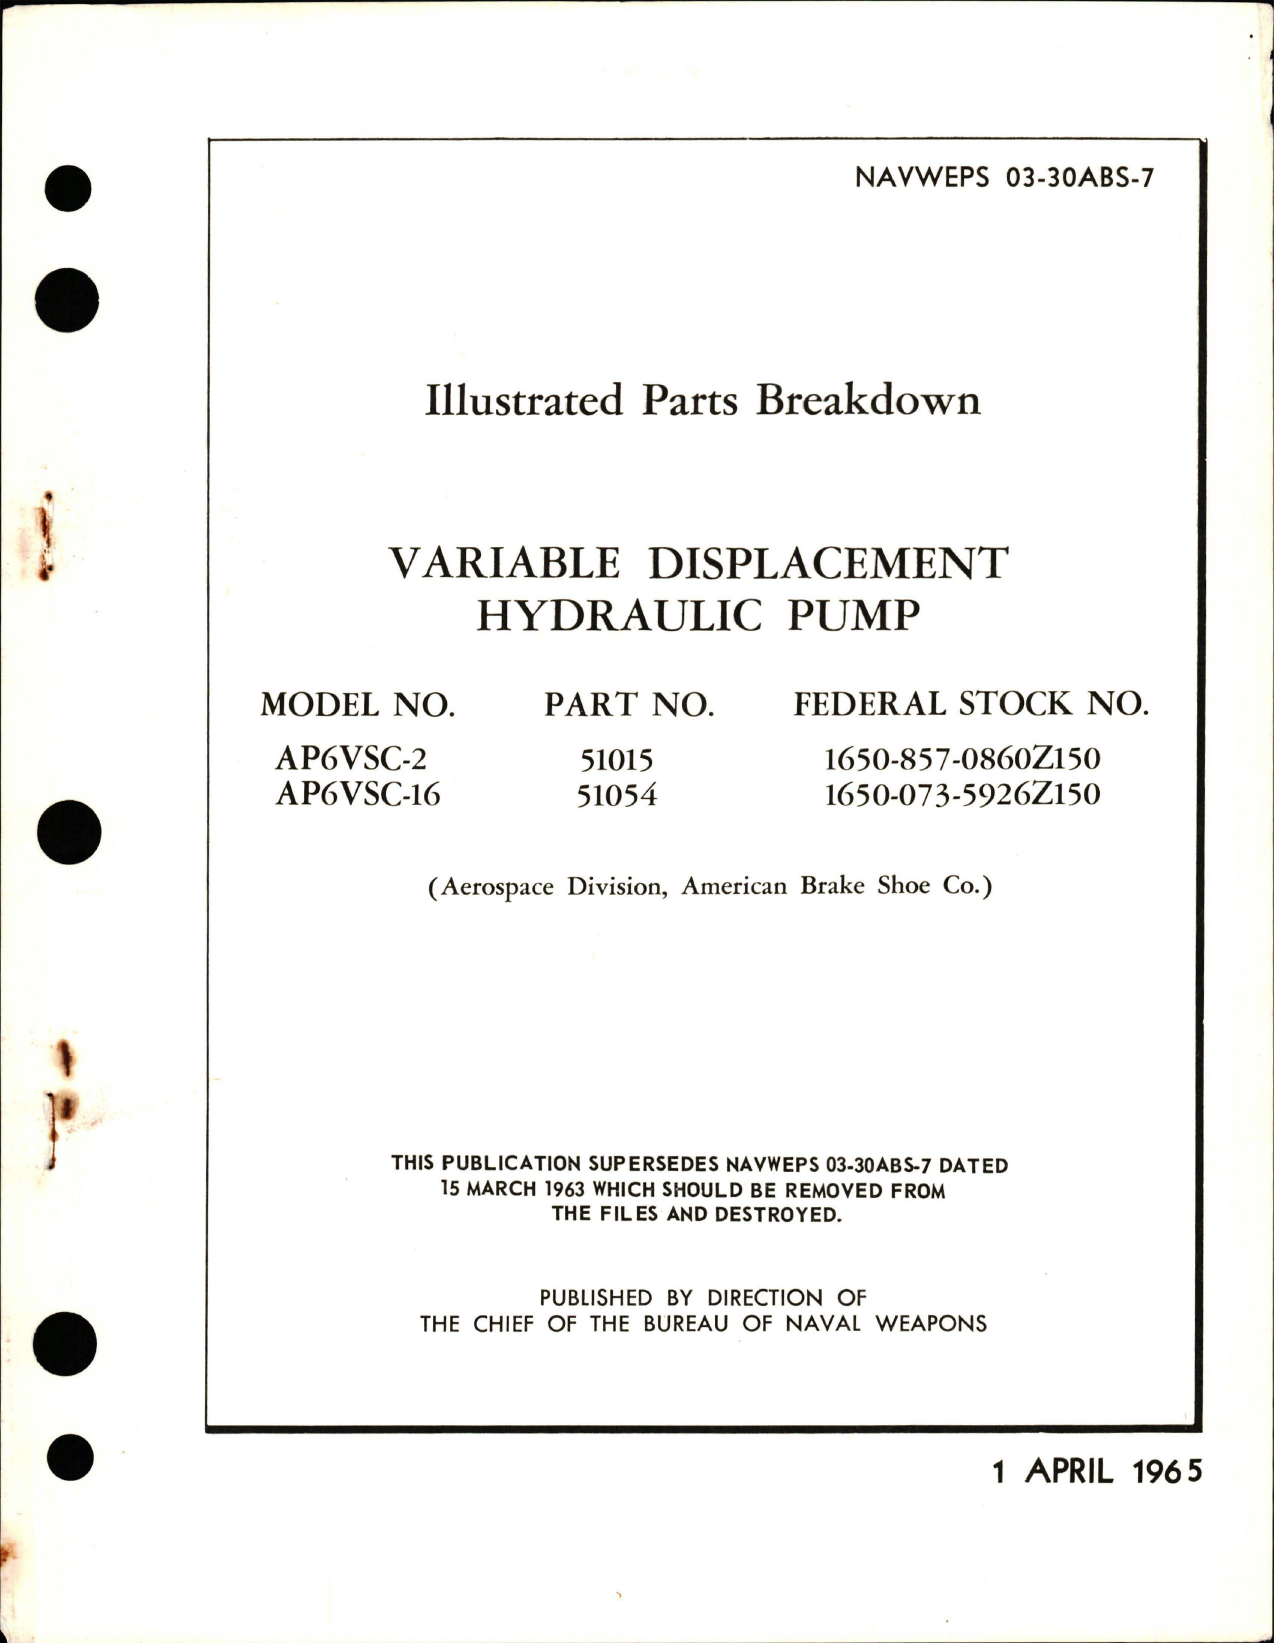 Sample page 1 from AirCorps Library document: Illustrated Parts Breakdown for Variable Displacement Hydraulic Pump - Models AP6VSC-2 and AP6VSC-16 - Parts 51015 and 51054 